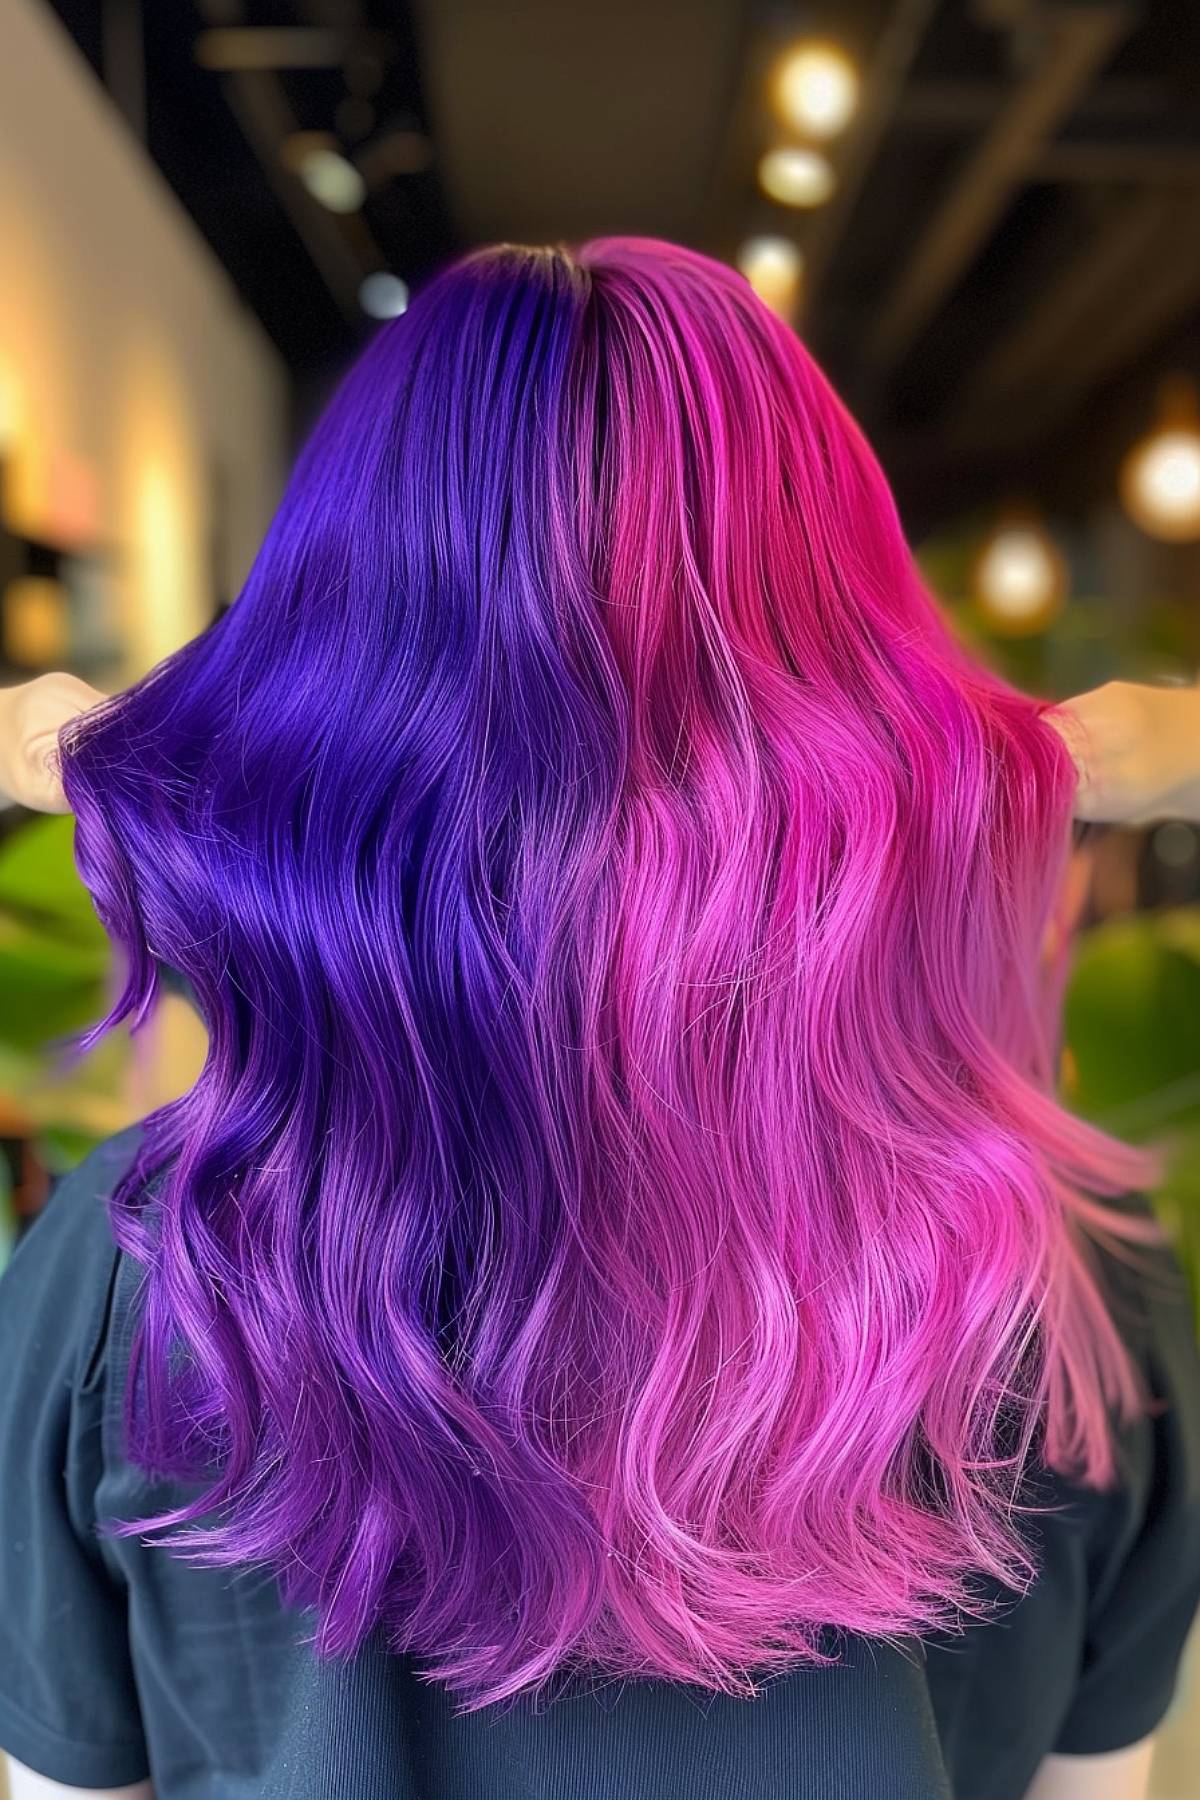 Curly hair with a stunning blend of bold pink transitioning into deep purple, reflecting Gemini creativity.